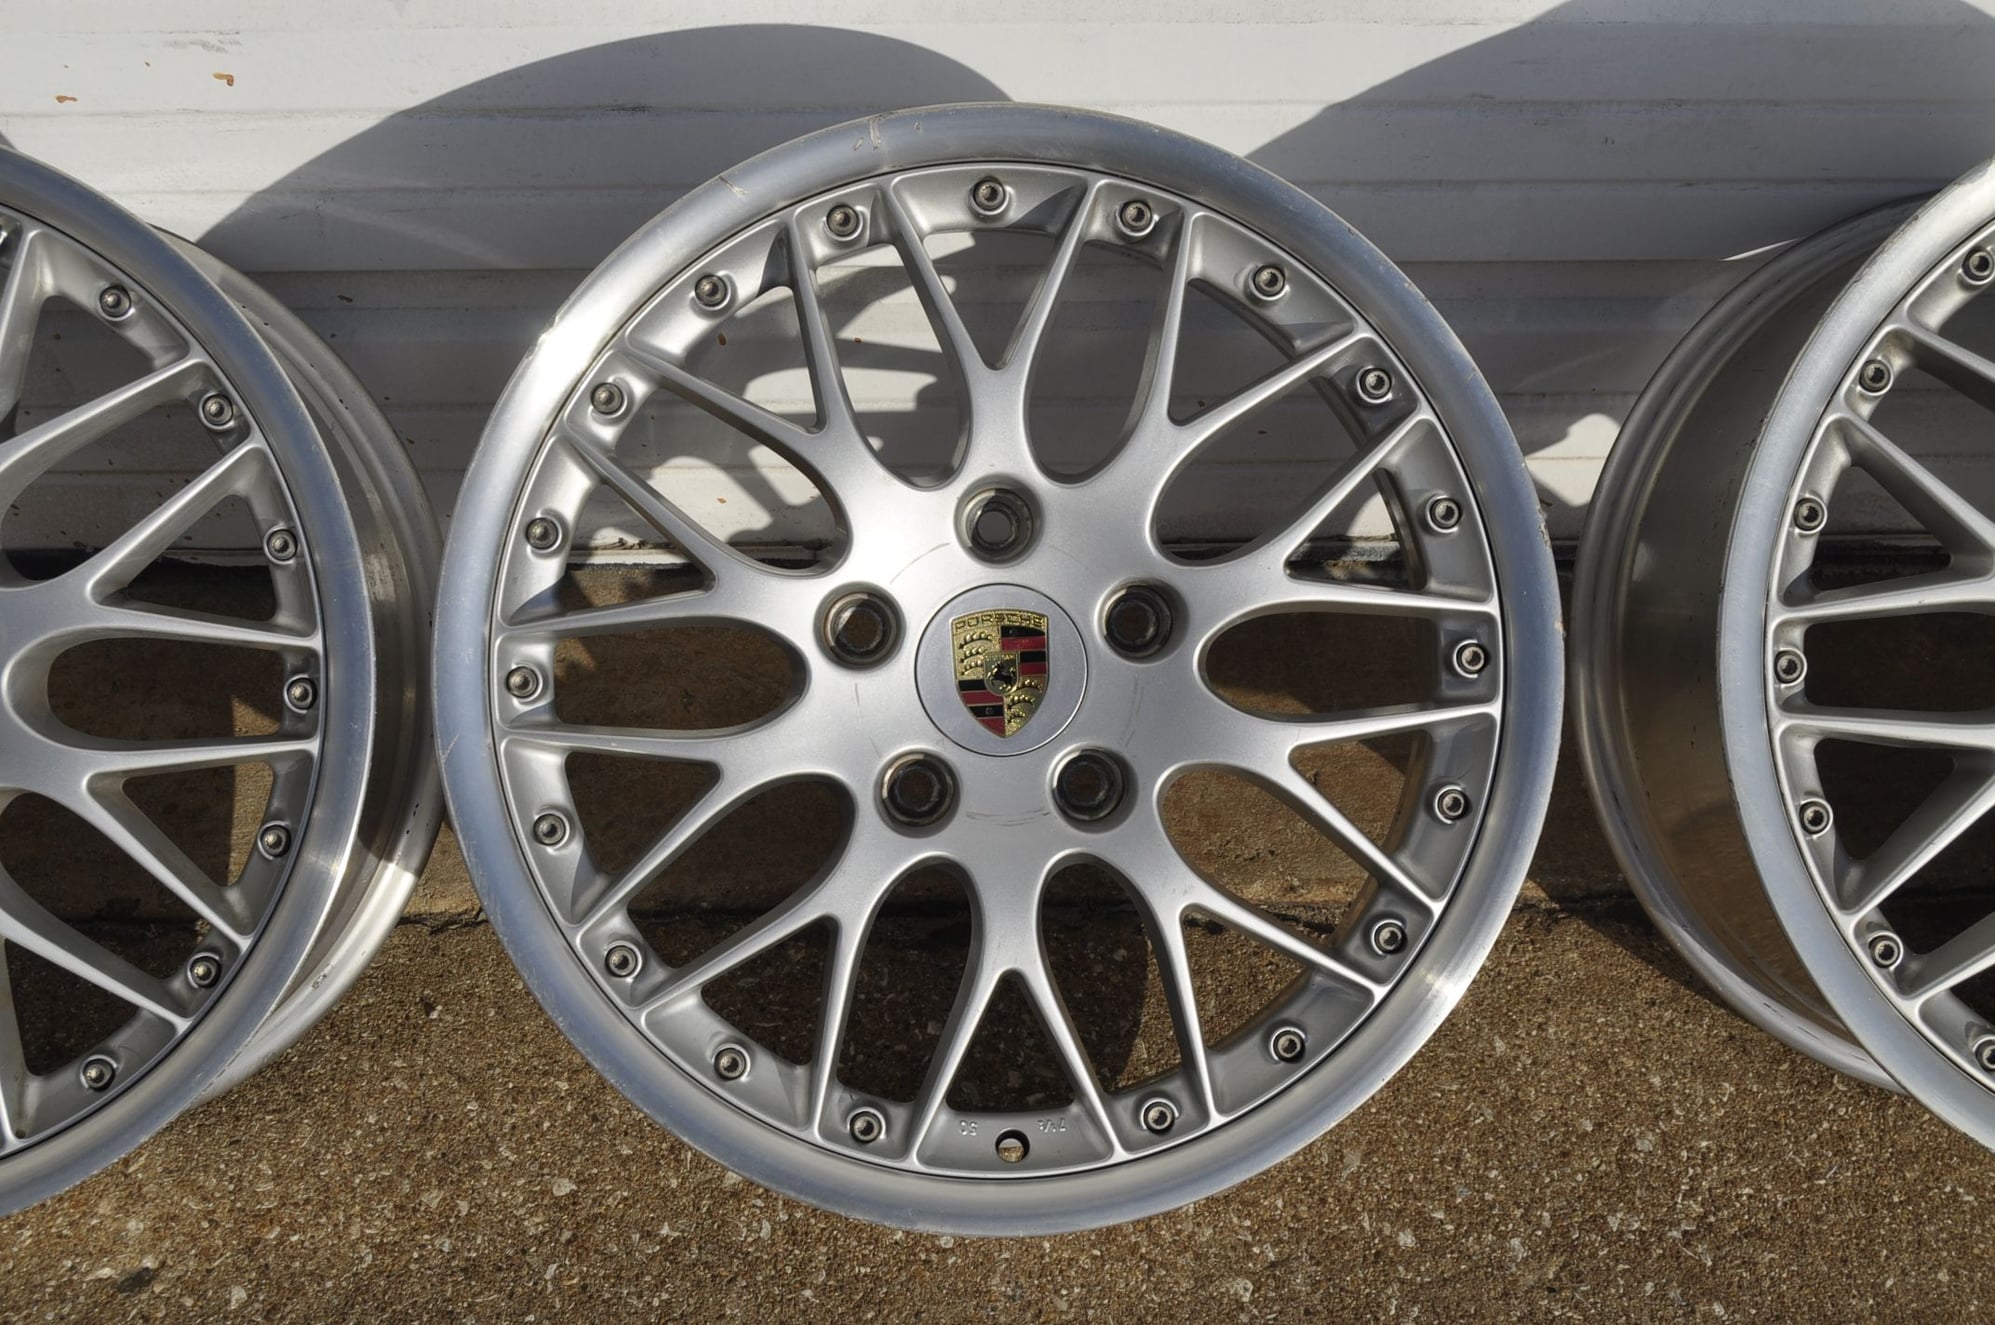 Wheels and Tires/Axles - 18" BBS Sport Classic II wheels, 993 and others - Used - 1987 to 2002 Porsche All Models - Dallas, TX 75229, United States